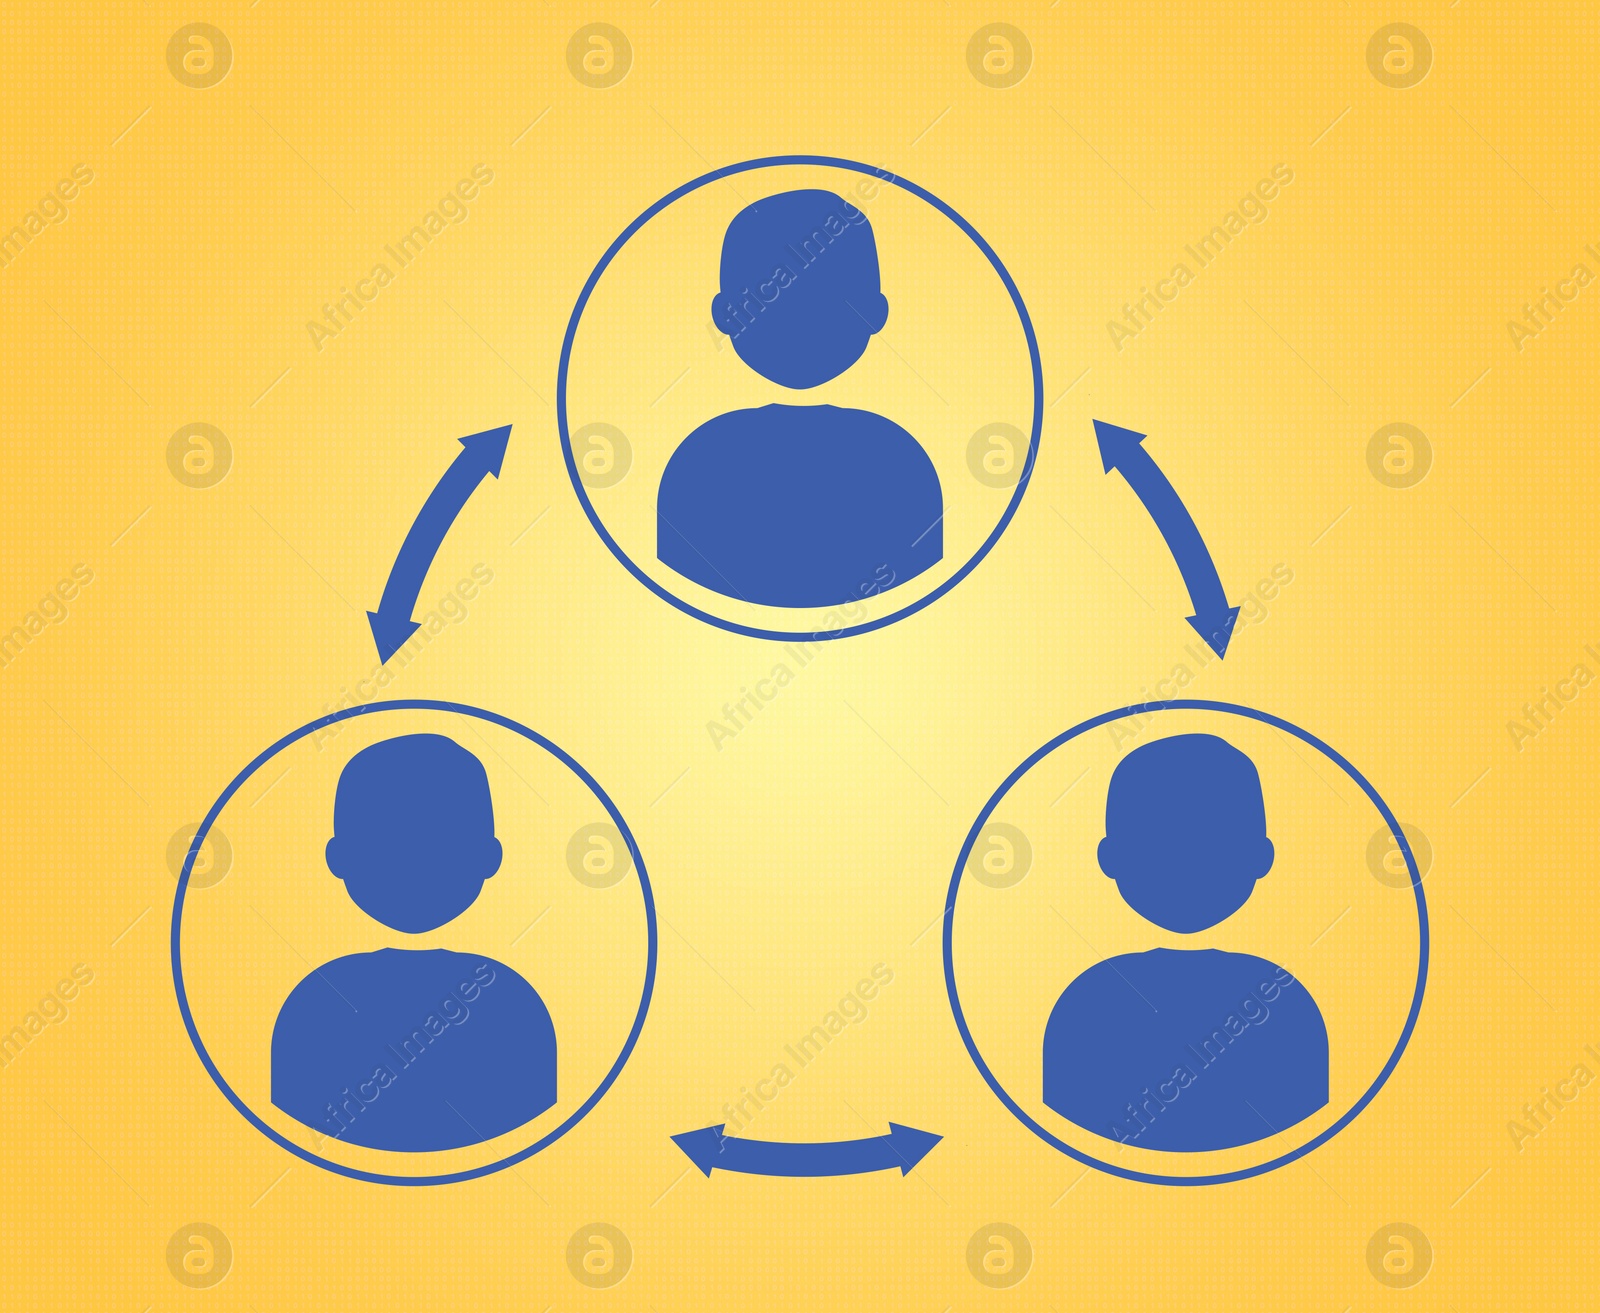 Illustration of Human icons connected with double arrows on golden background, illustration. Multi-user system